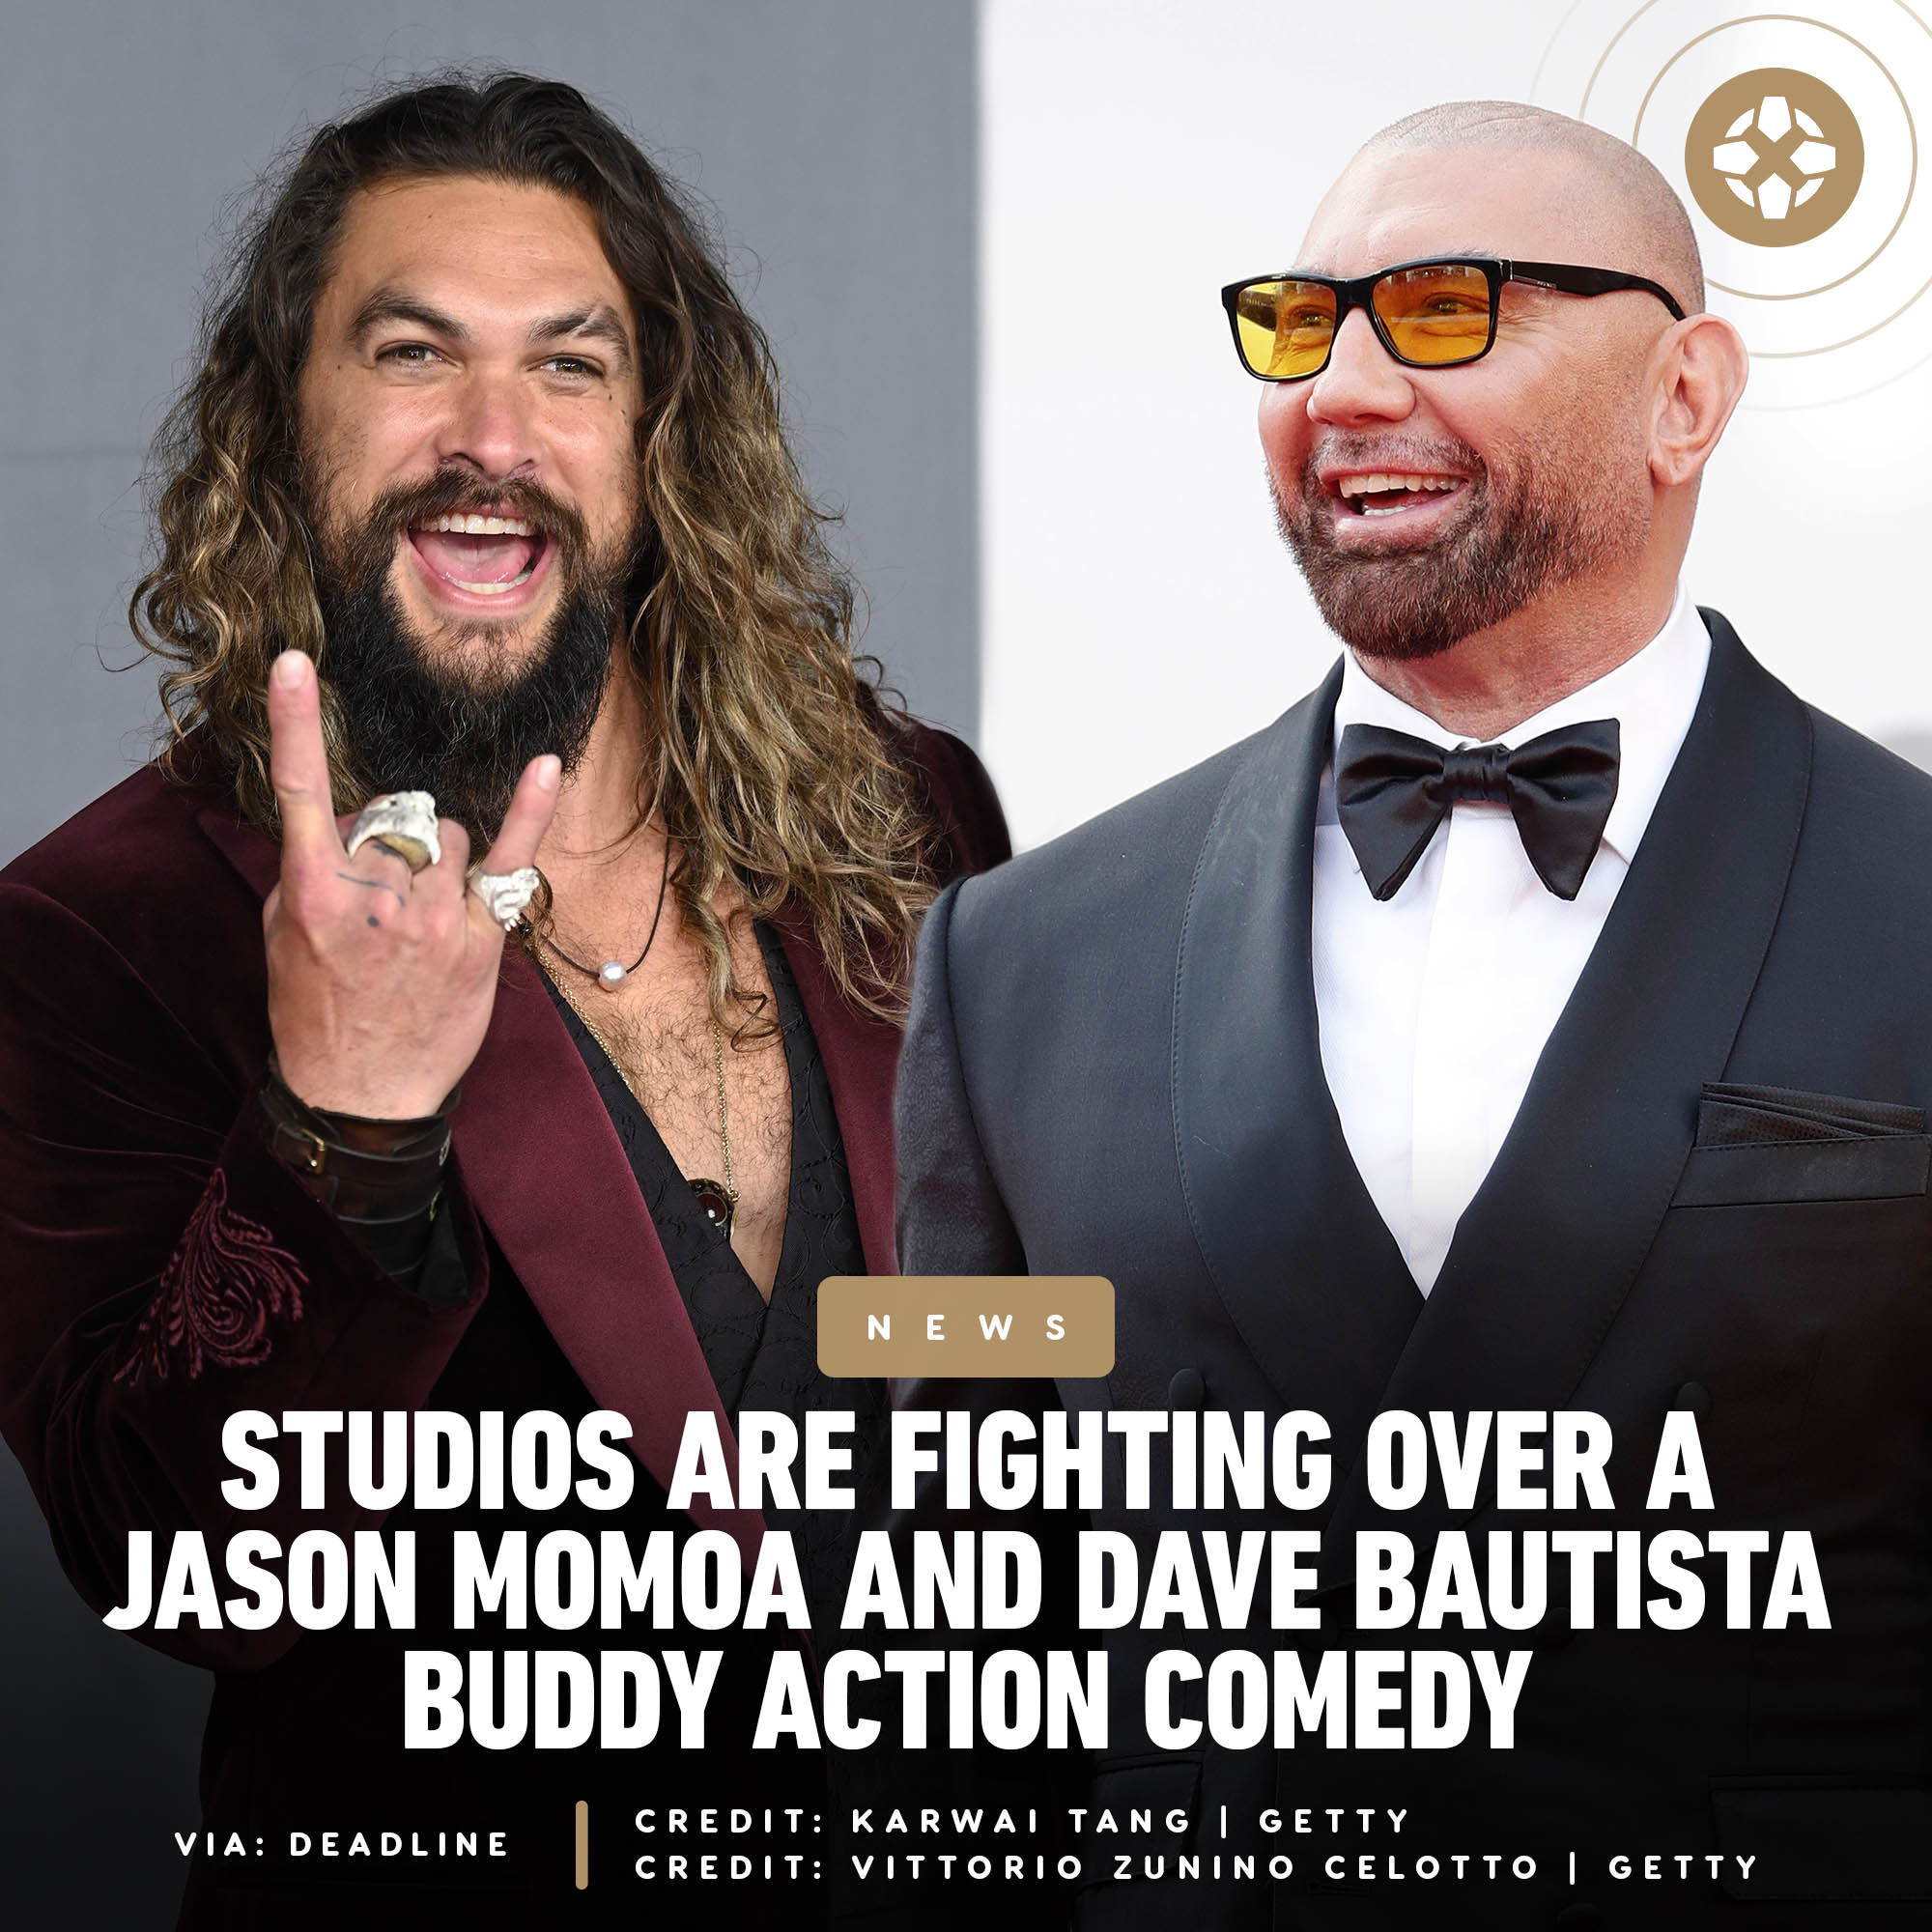 Jason Momoa-Dave Bautista Buddy Action Comedy Sells To MGM After 4